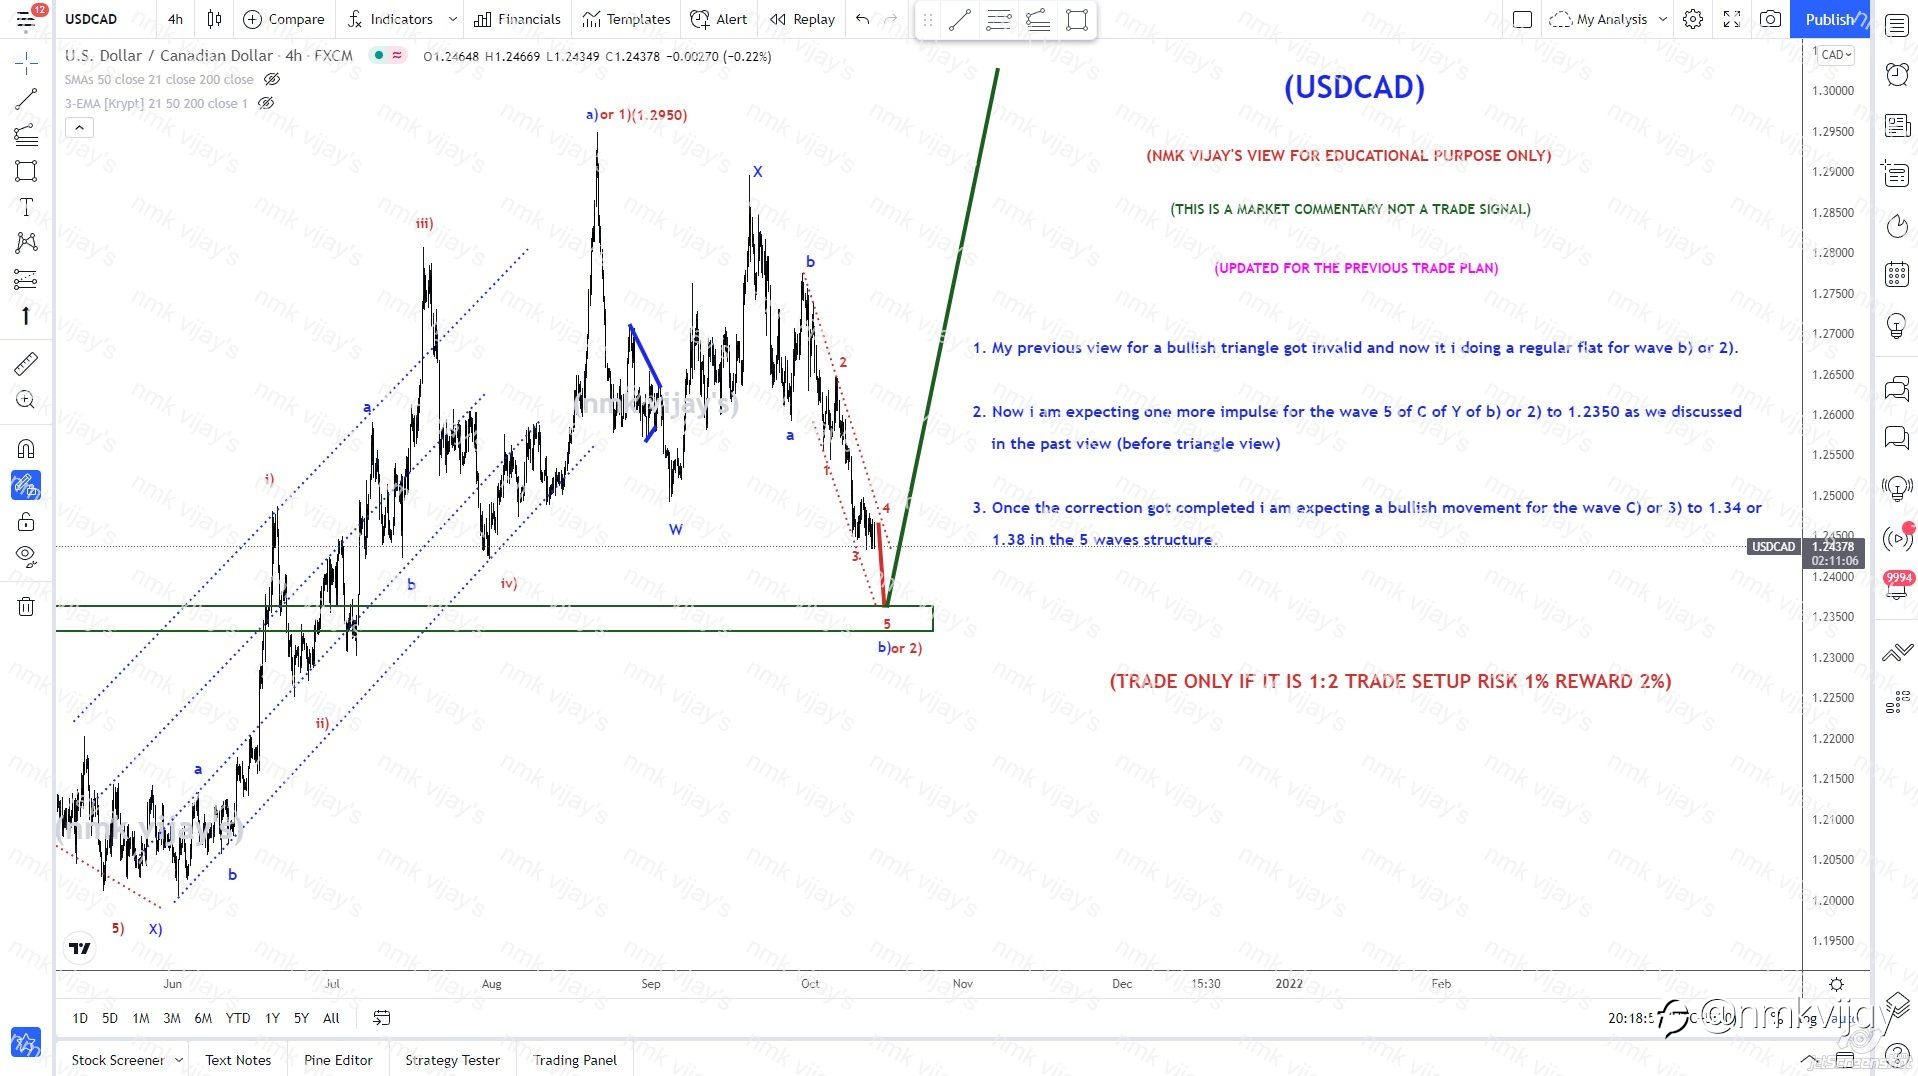 USDCAD-Flat correction going to complete @ 1.2350 and then 1.34?